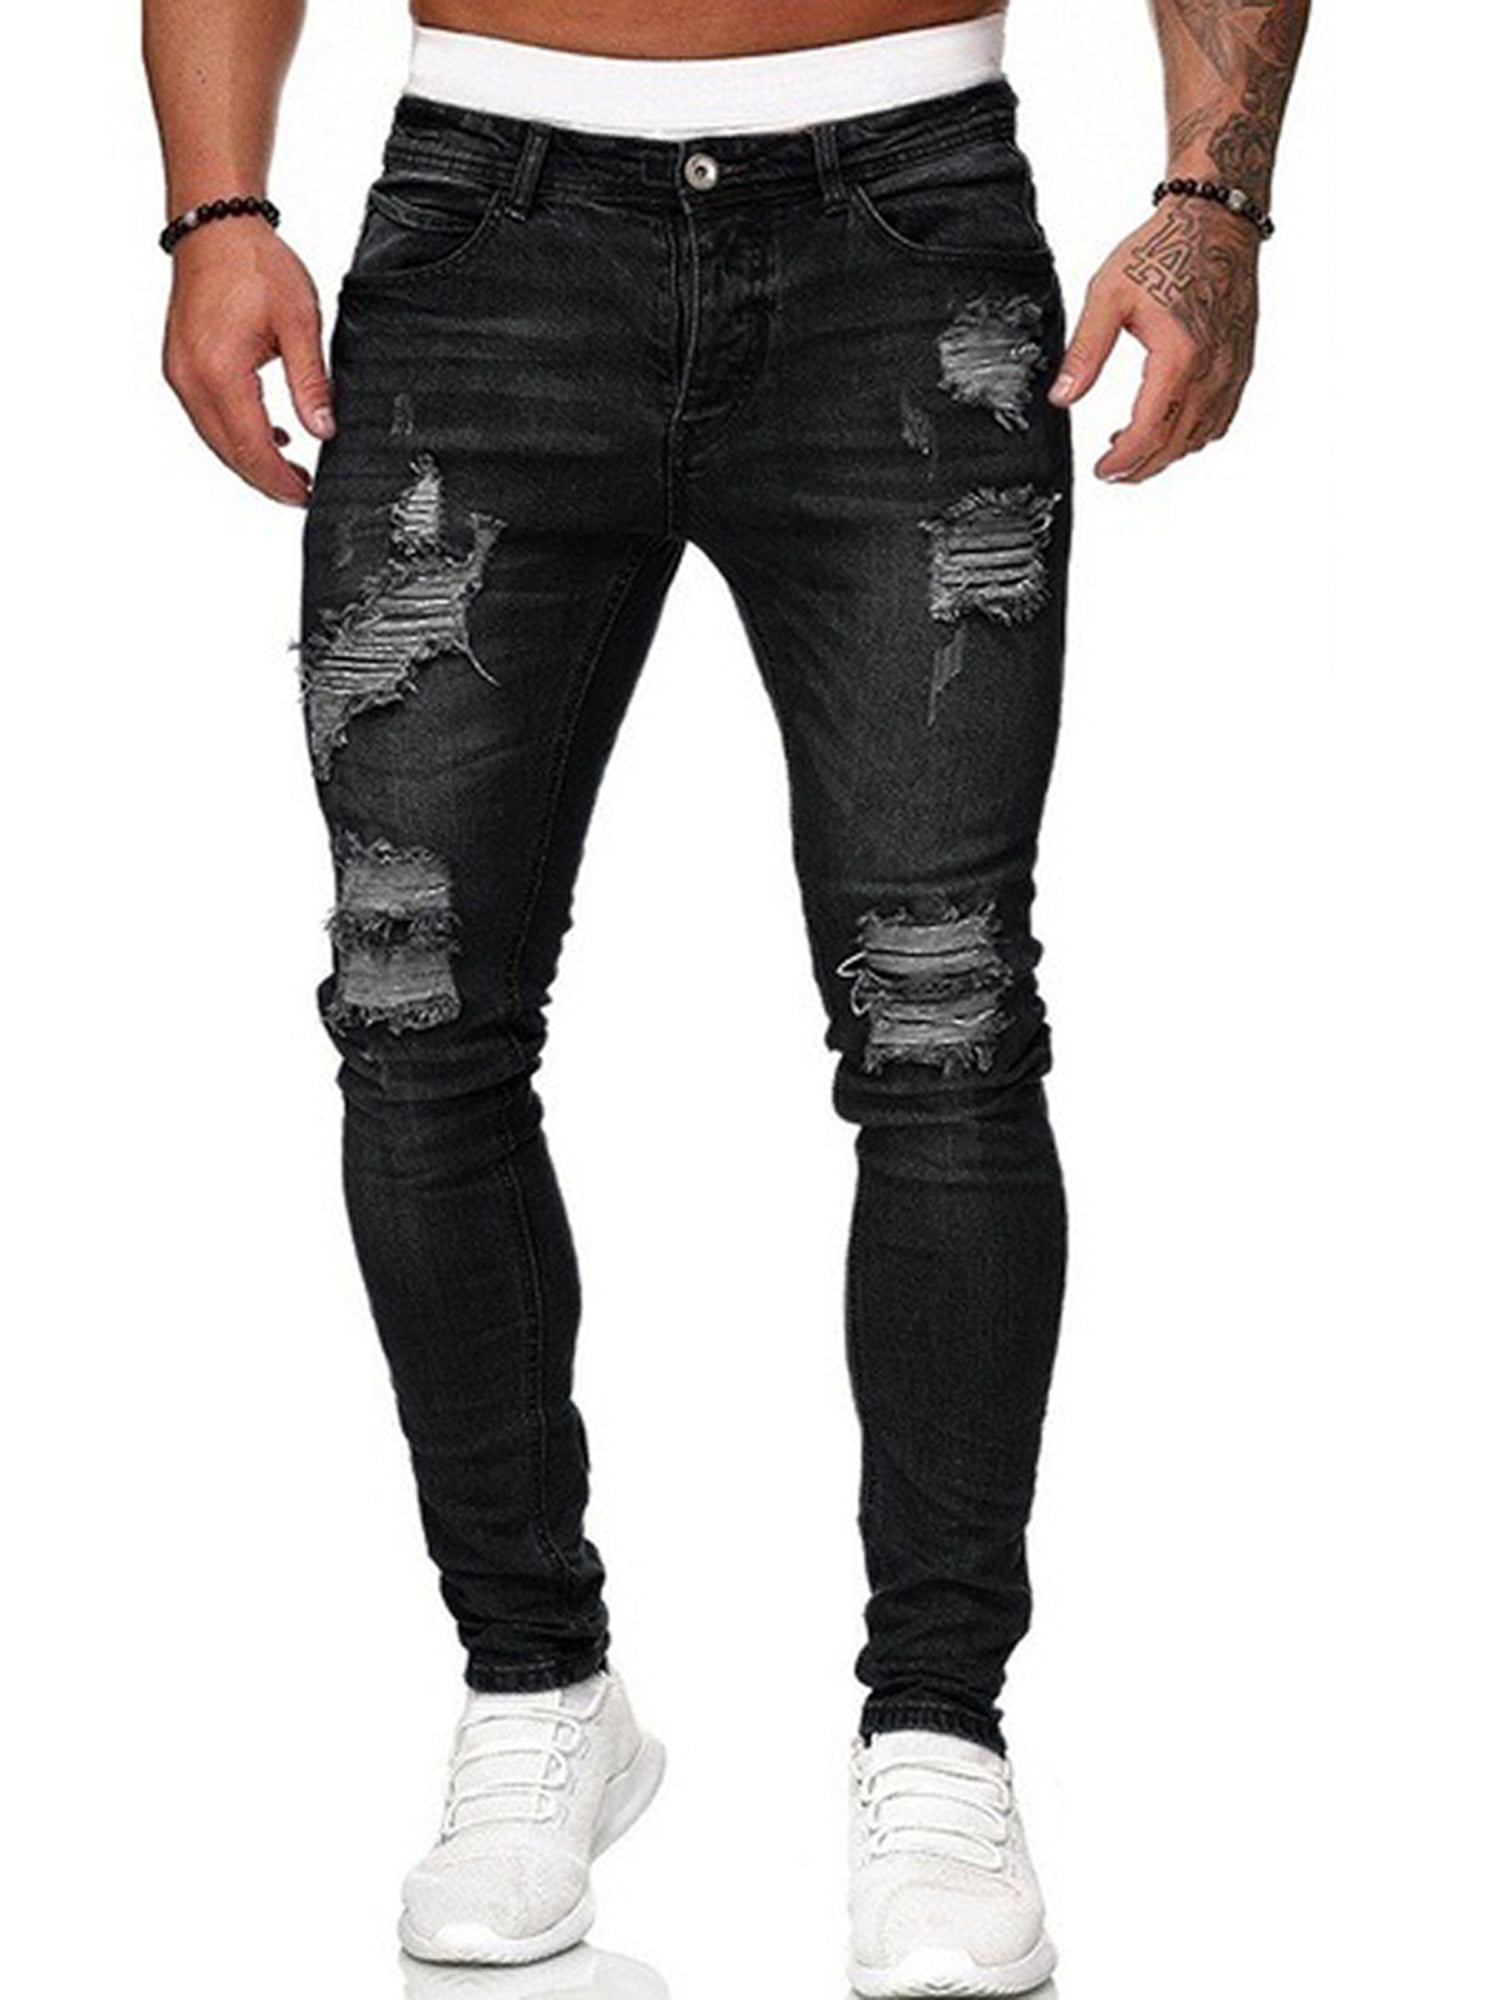 CenturyX Men's Skinny Distressed Ripped Jeans Destroyed Stretchy Knee Holes  Slim Tapered Leg Jeans Black XXXL